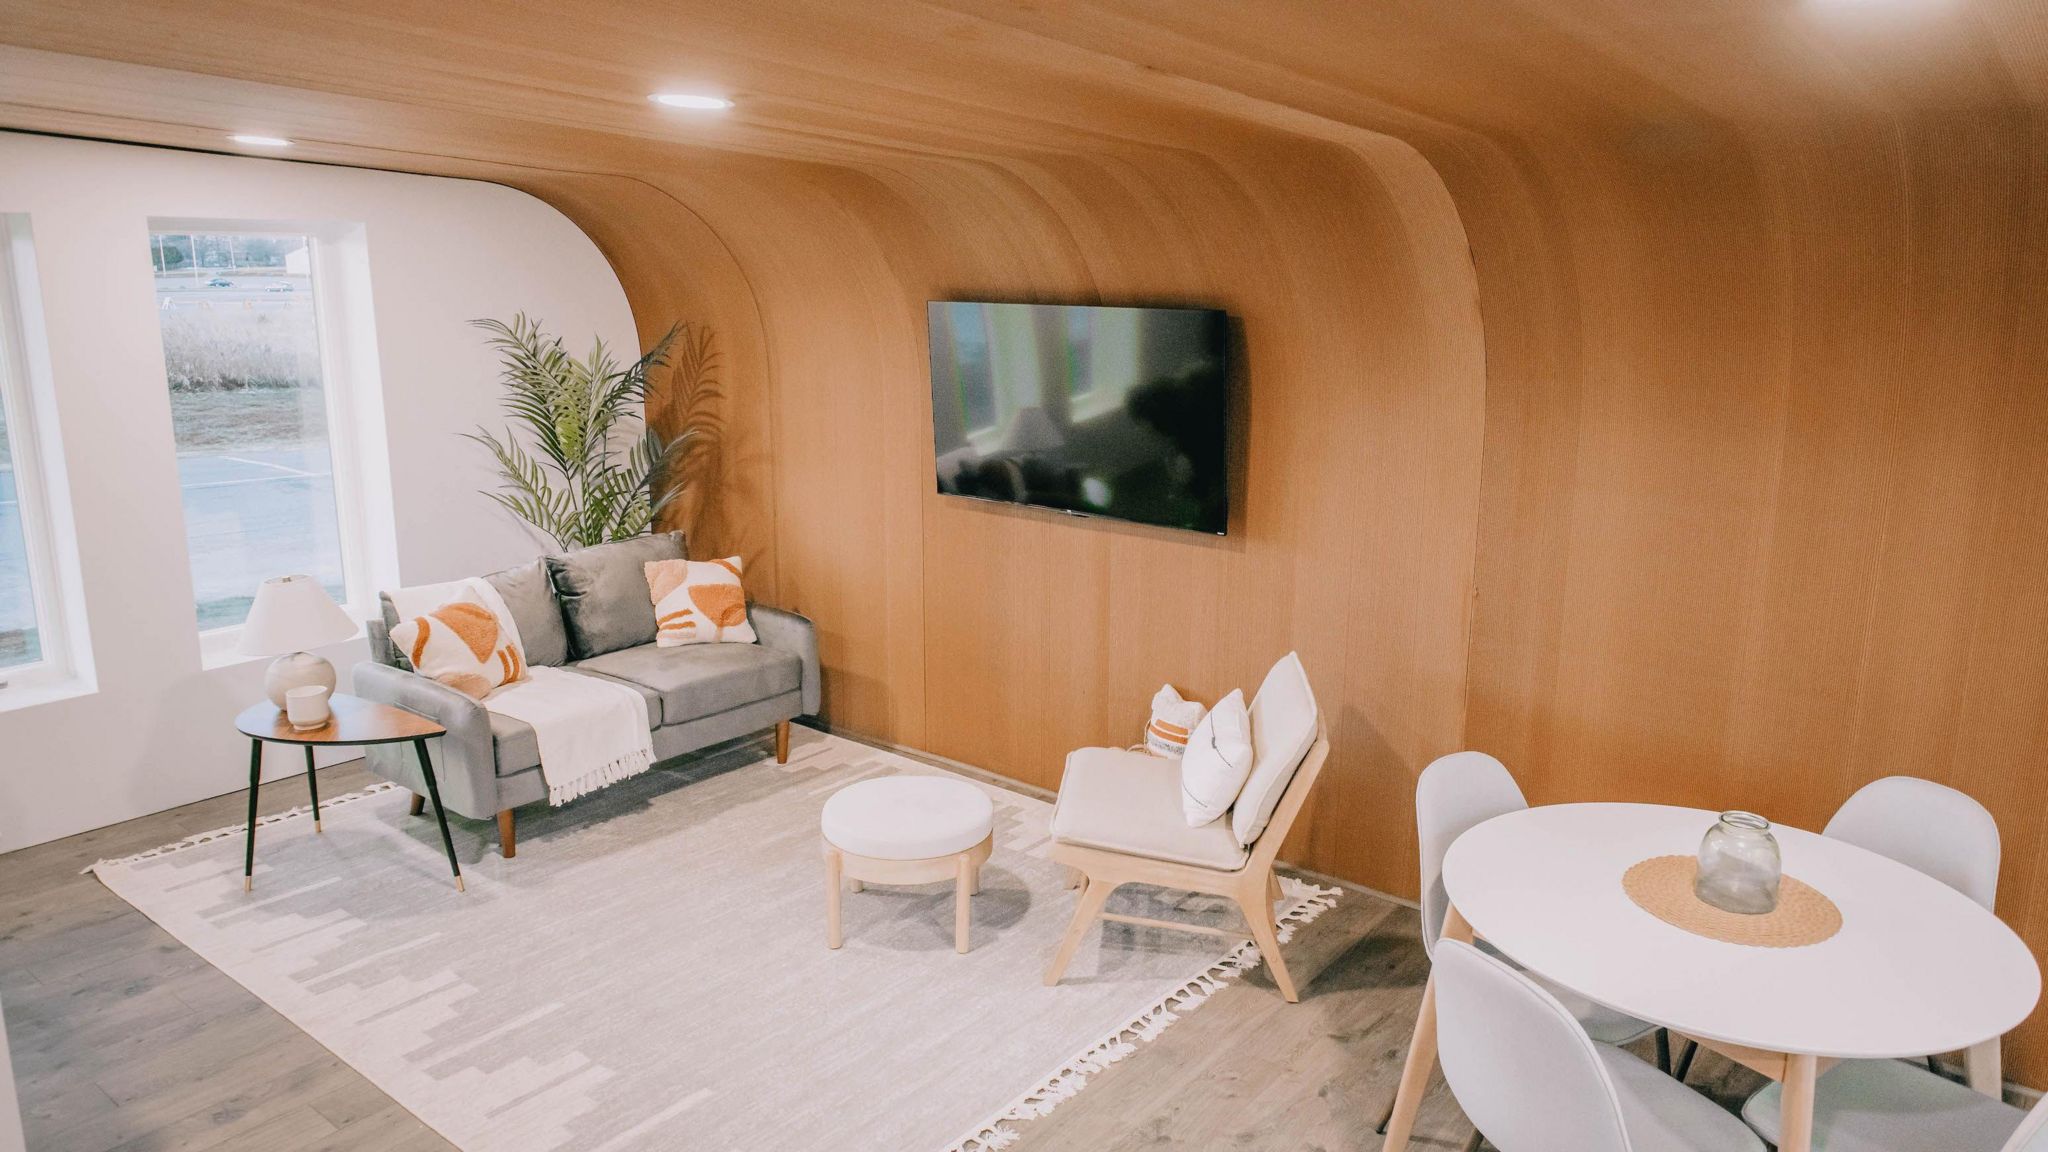 BioHome3D was printed using sustainable materials in a University of Maine project